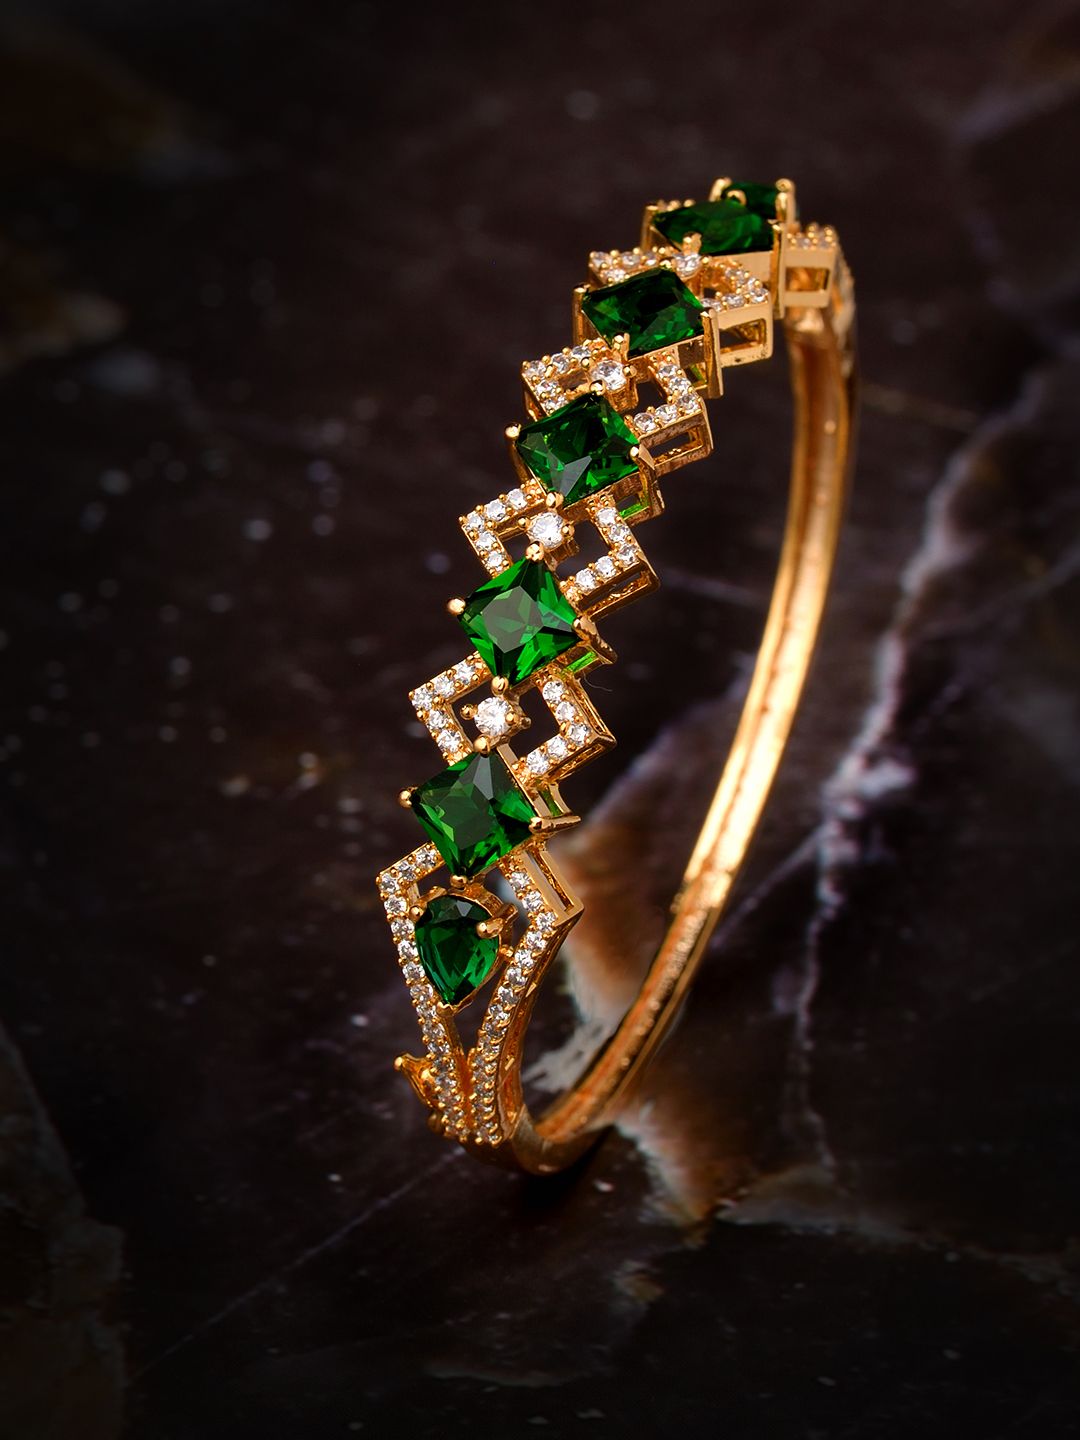 Saraf RS Jewellery Gold-Plated & Green Handcrafted Bangle-Style Bracelet Price in India